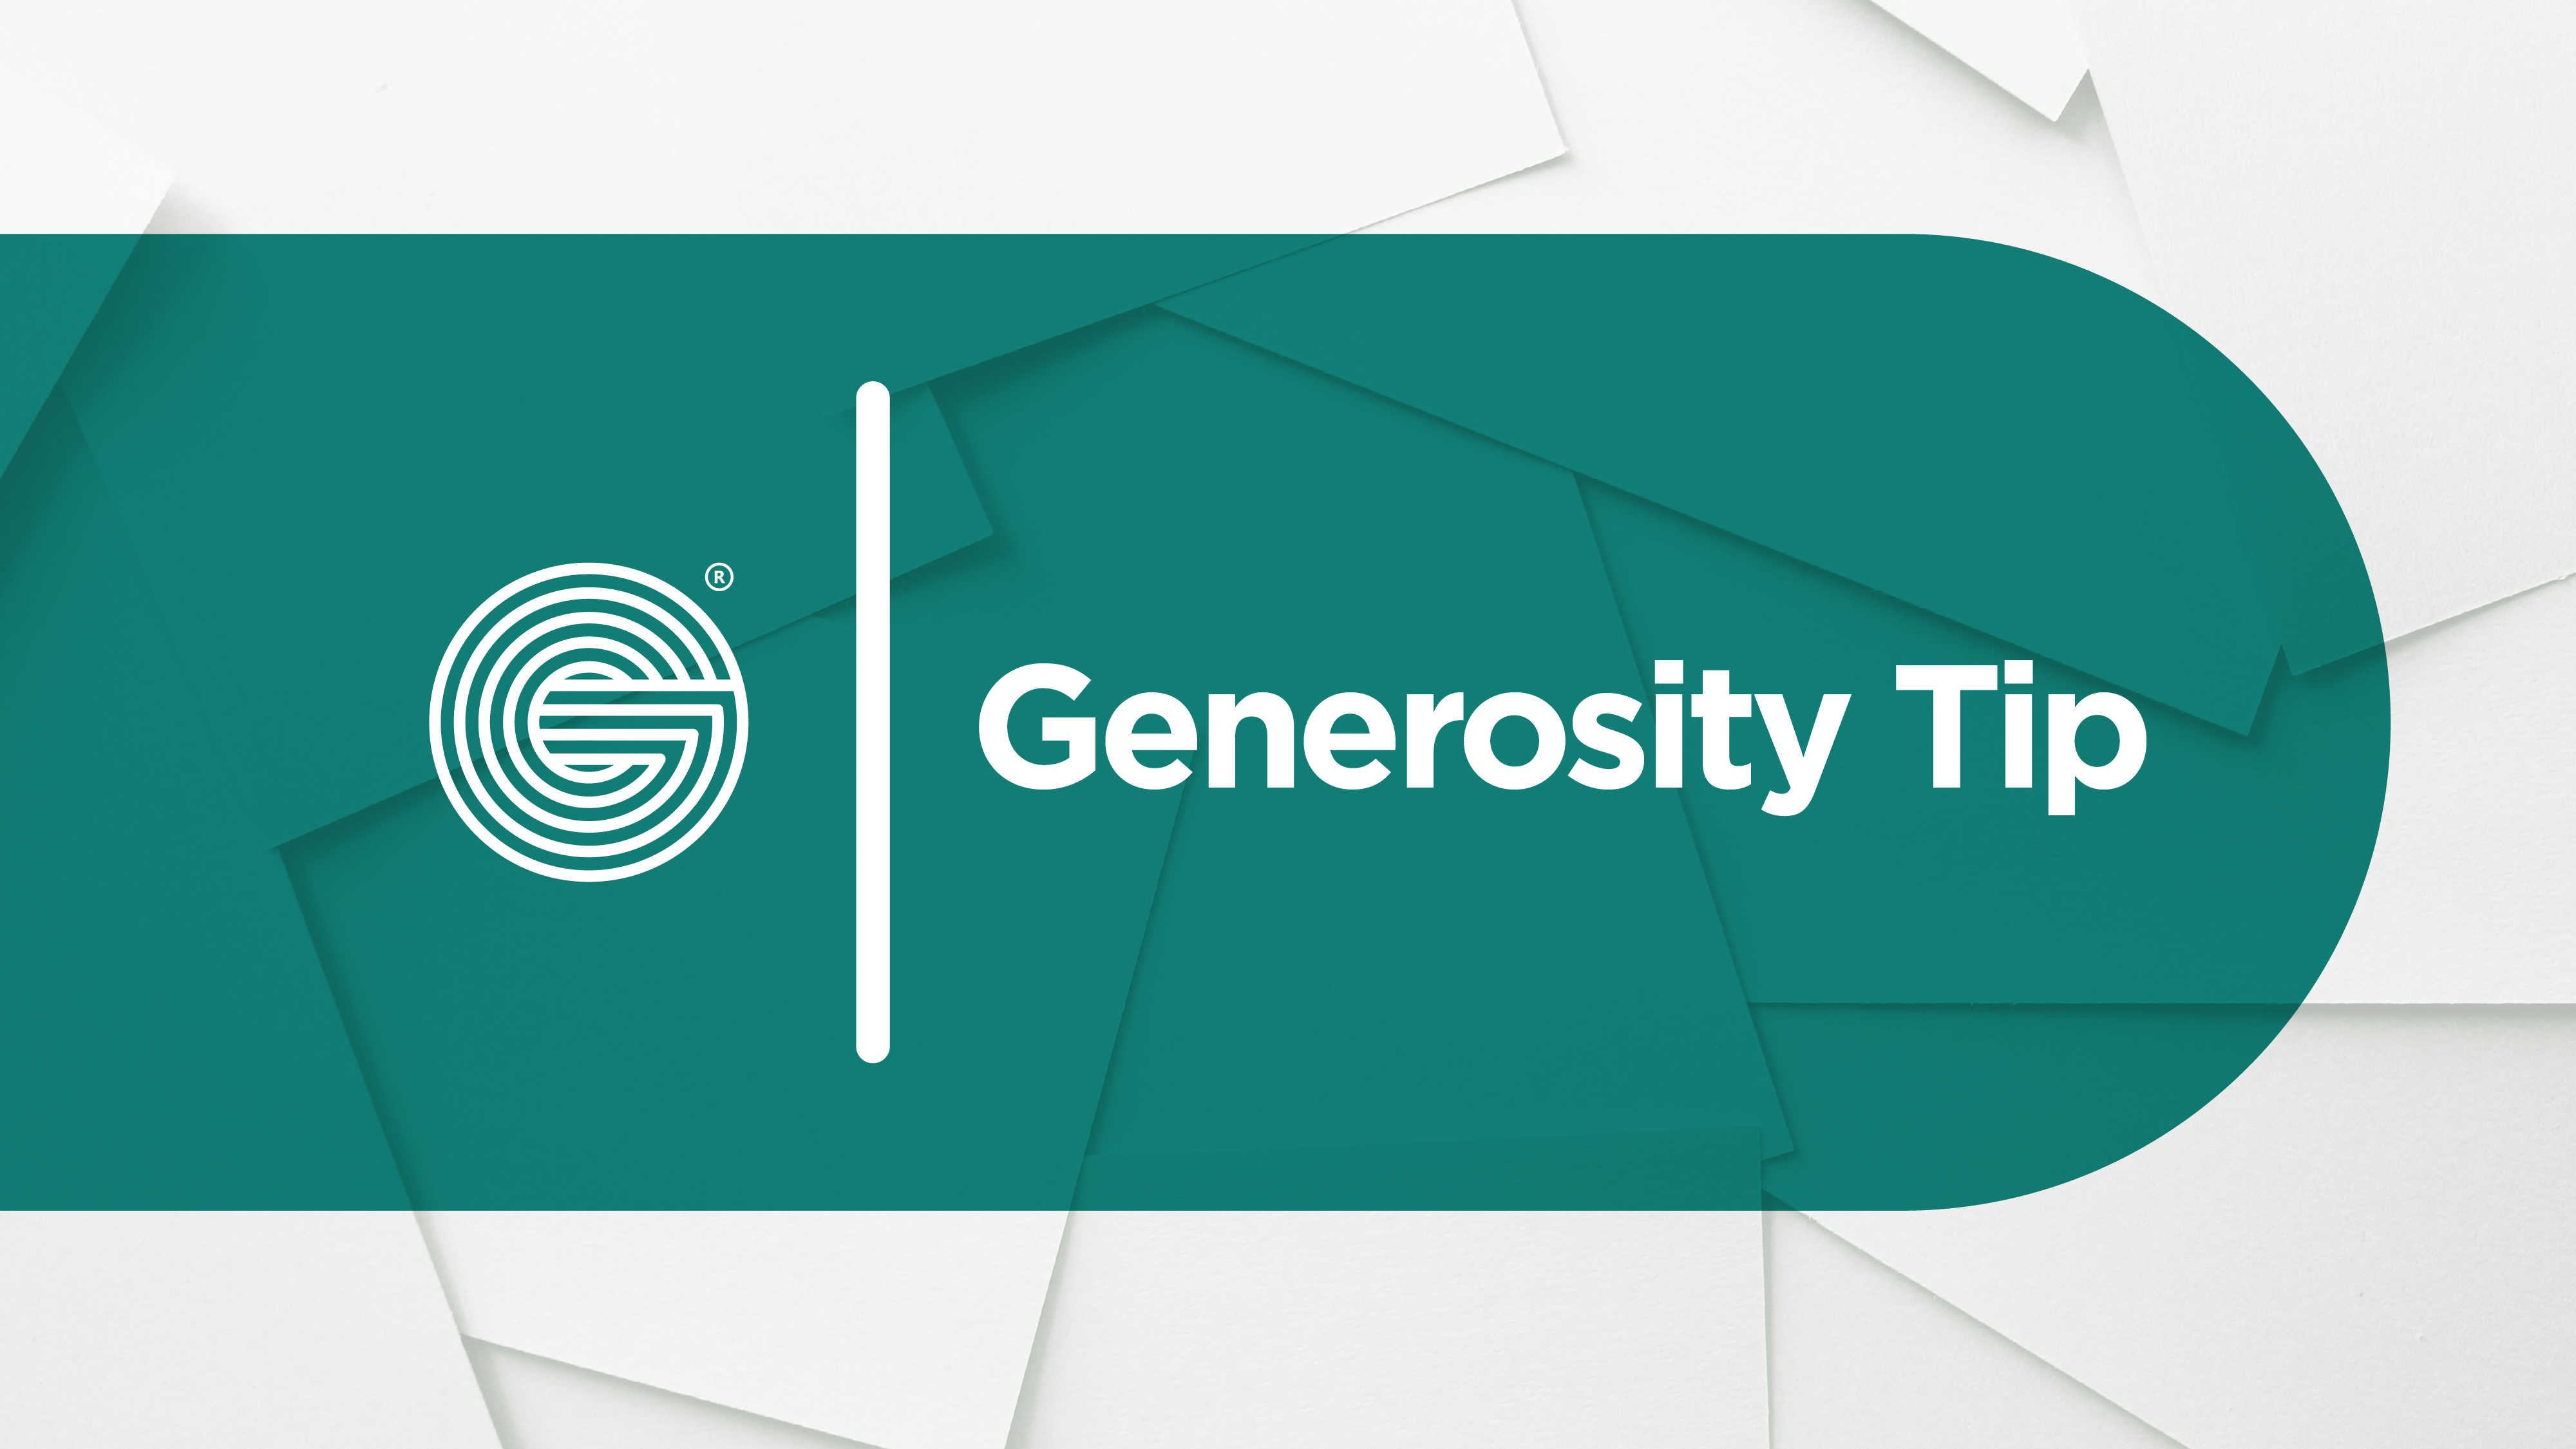 Biblical Generosity - Giving to Vs. Giving From